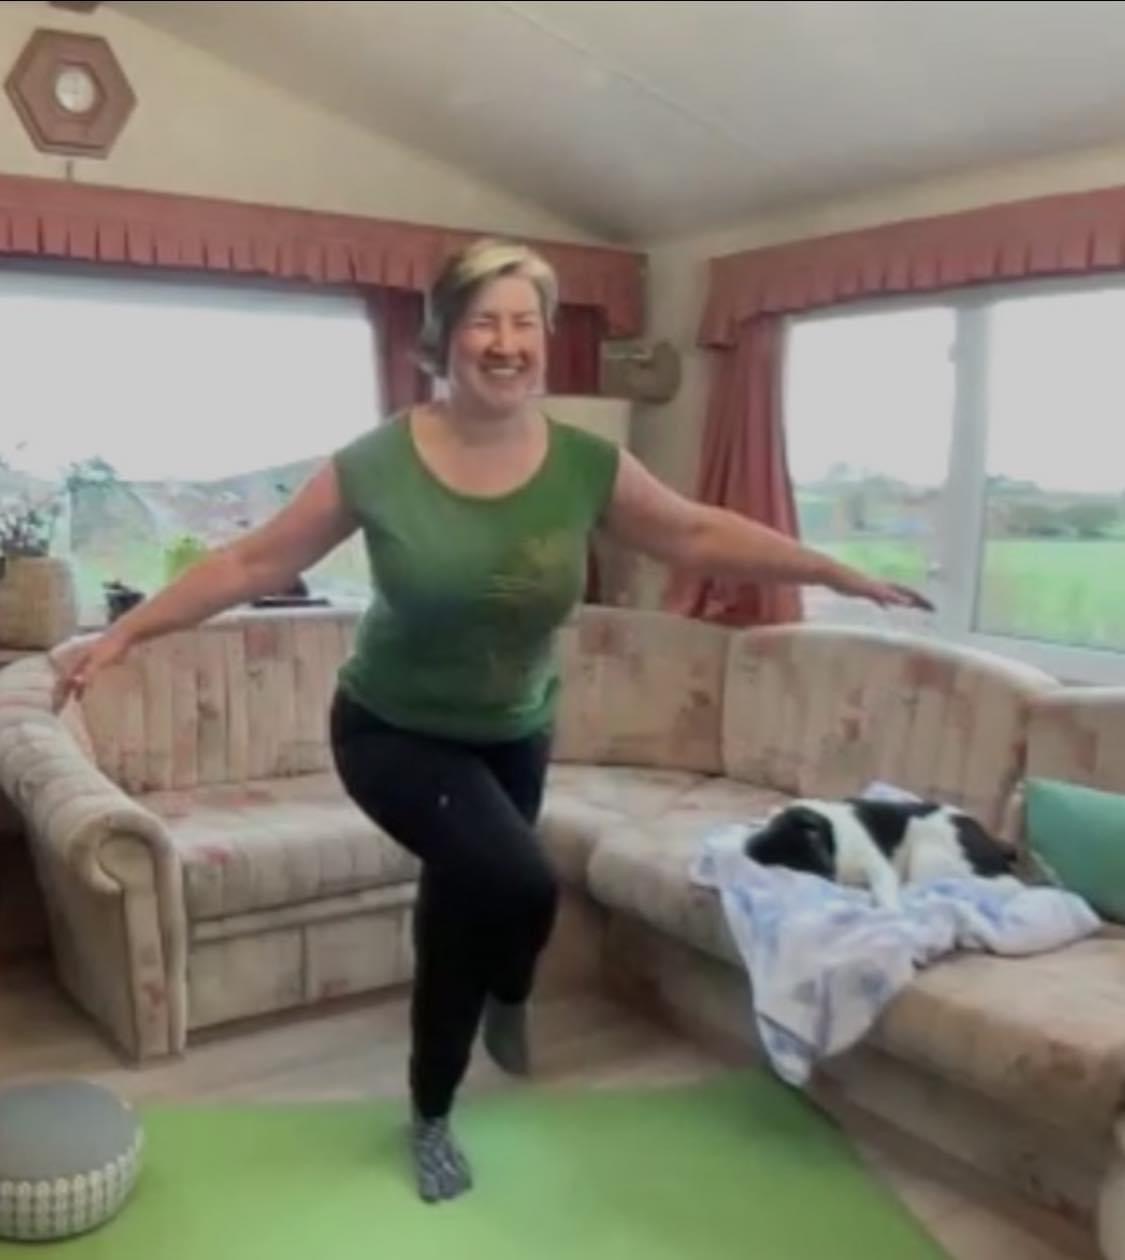 Louise standing on one leg with the other crossed over in eagle pos. Her arms are outstretched and she's smiling. She's standing on a green yoga mat and Rosie the small black and white dog is sleeping on a blanket on the sofa next to her.